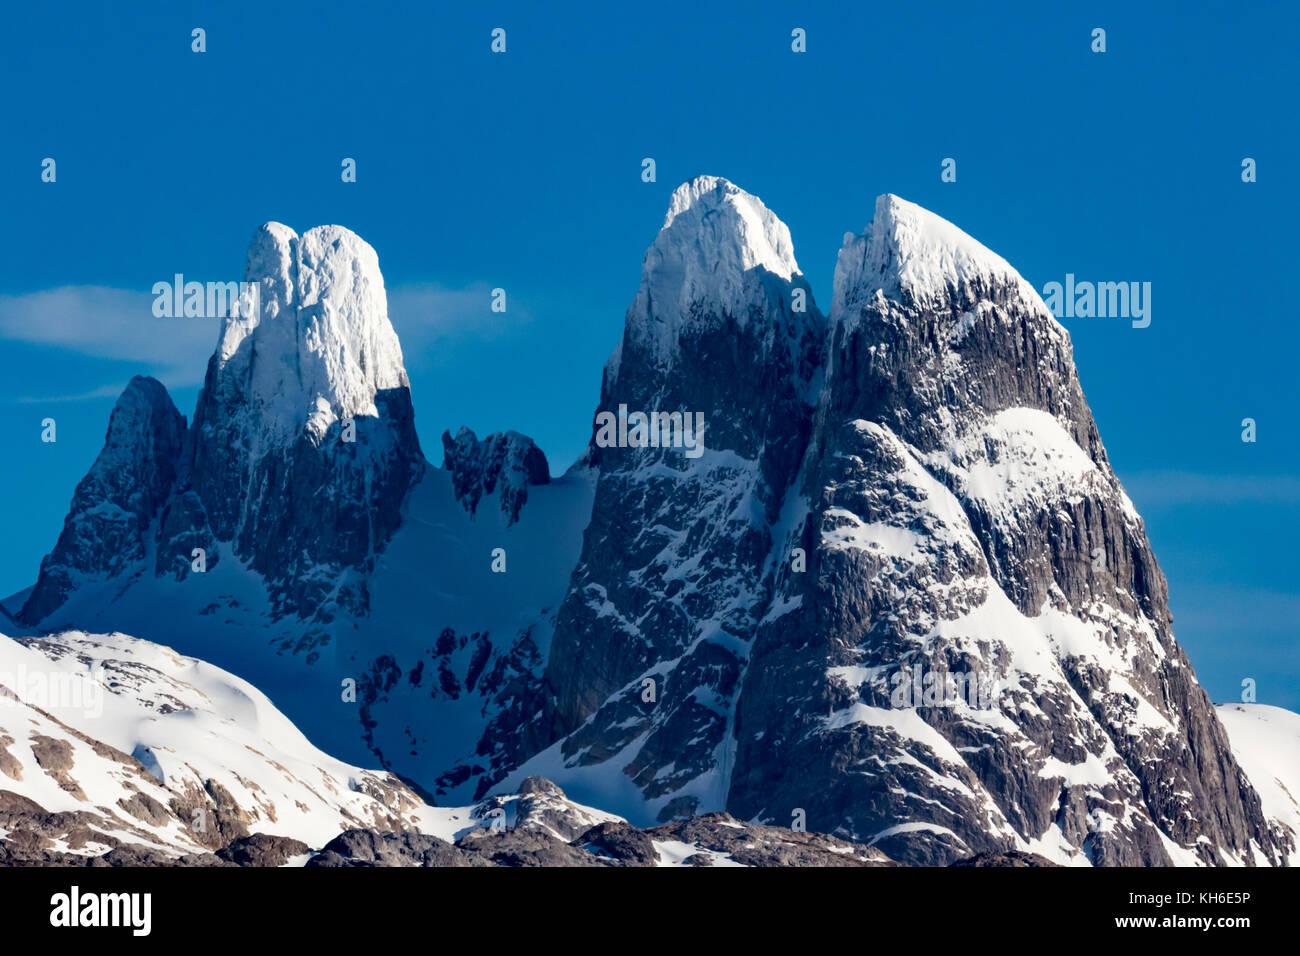 The stunning scenery of the high peaks of Patagonia and the Chilean fjords near Puerto Natales, Chile Stock Photo